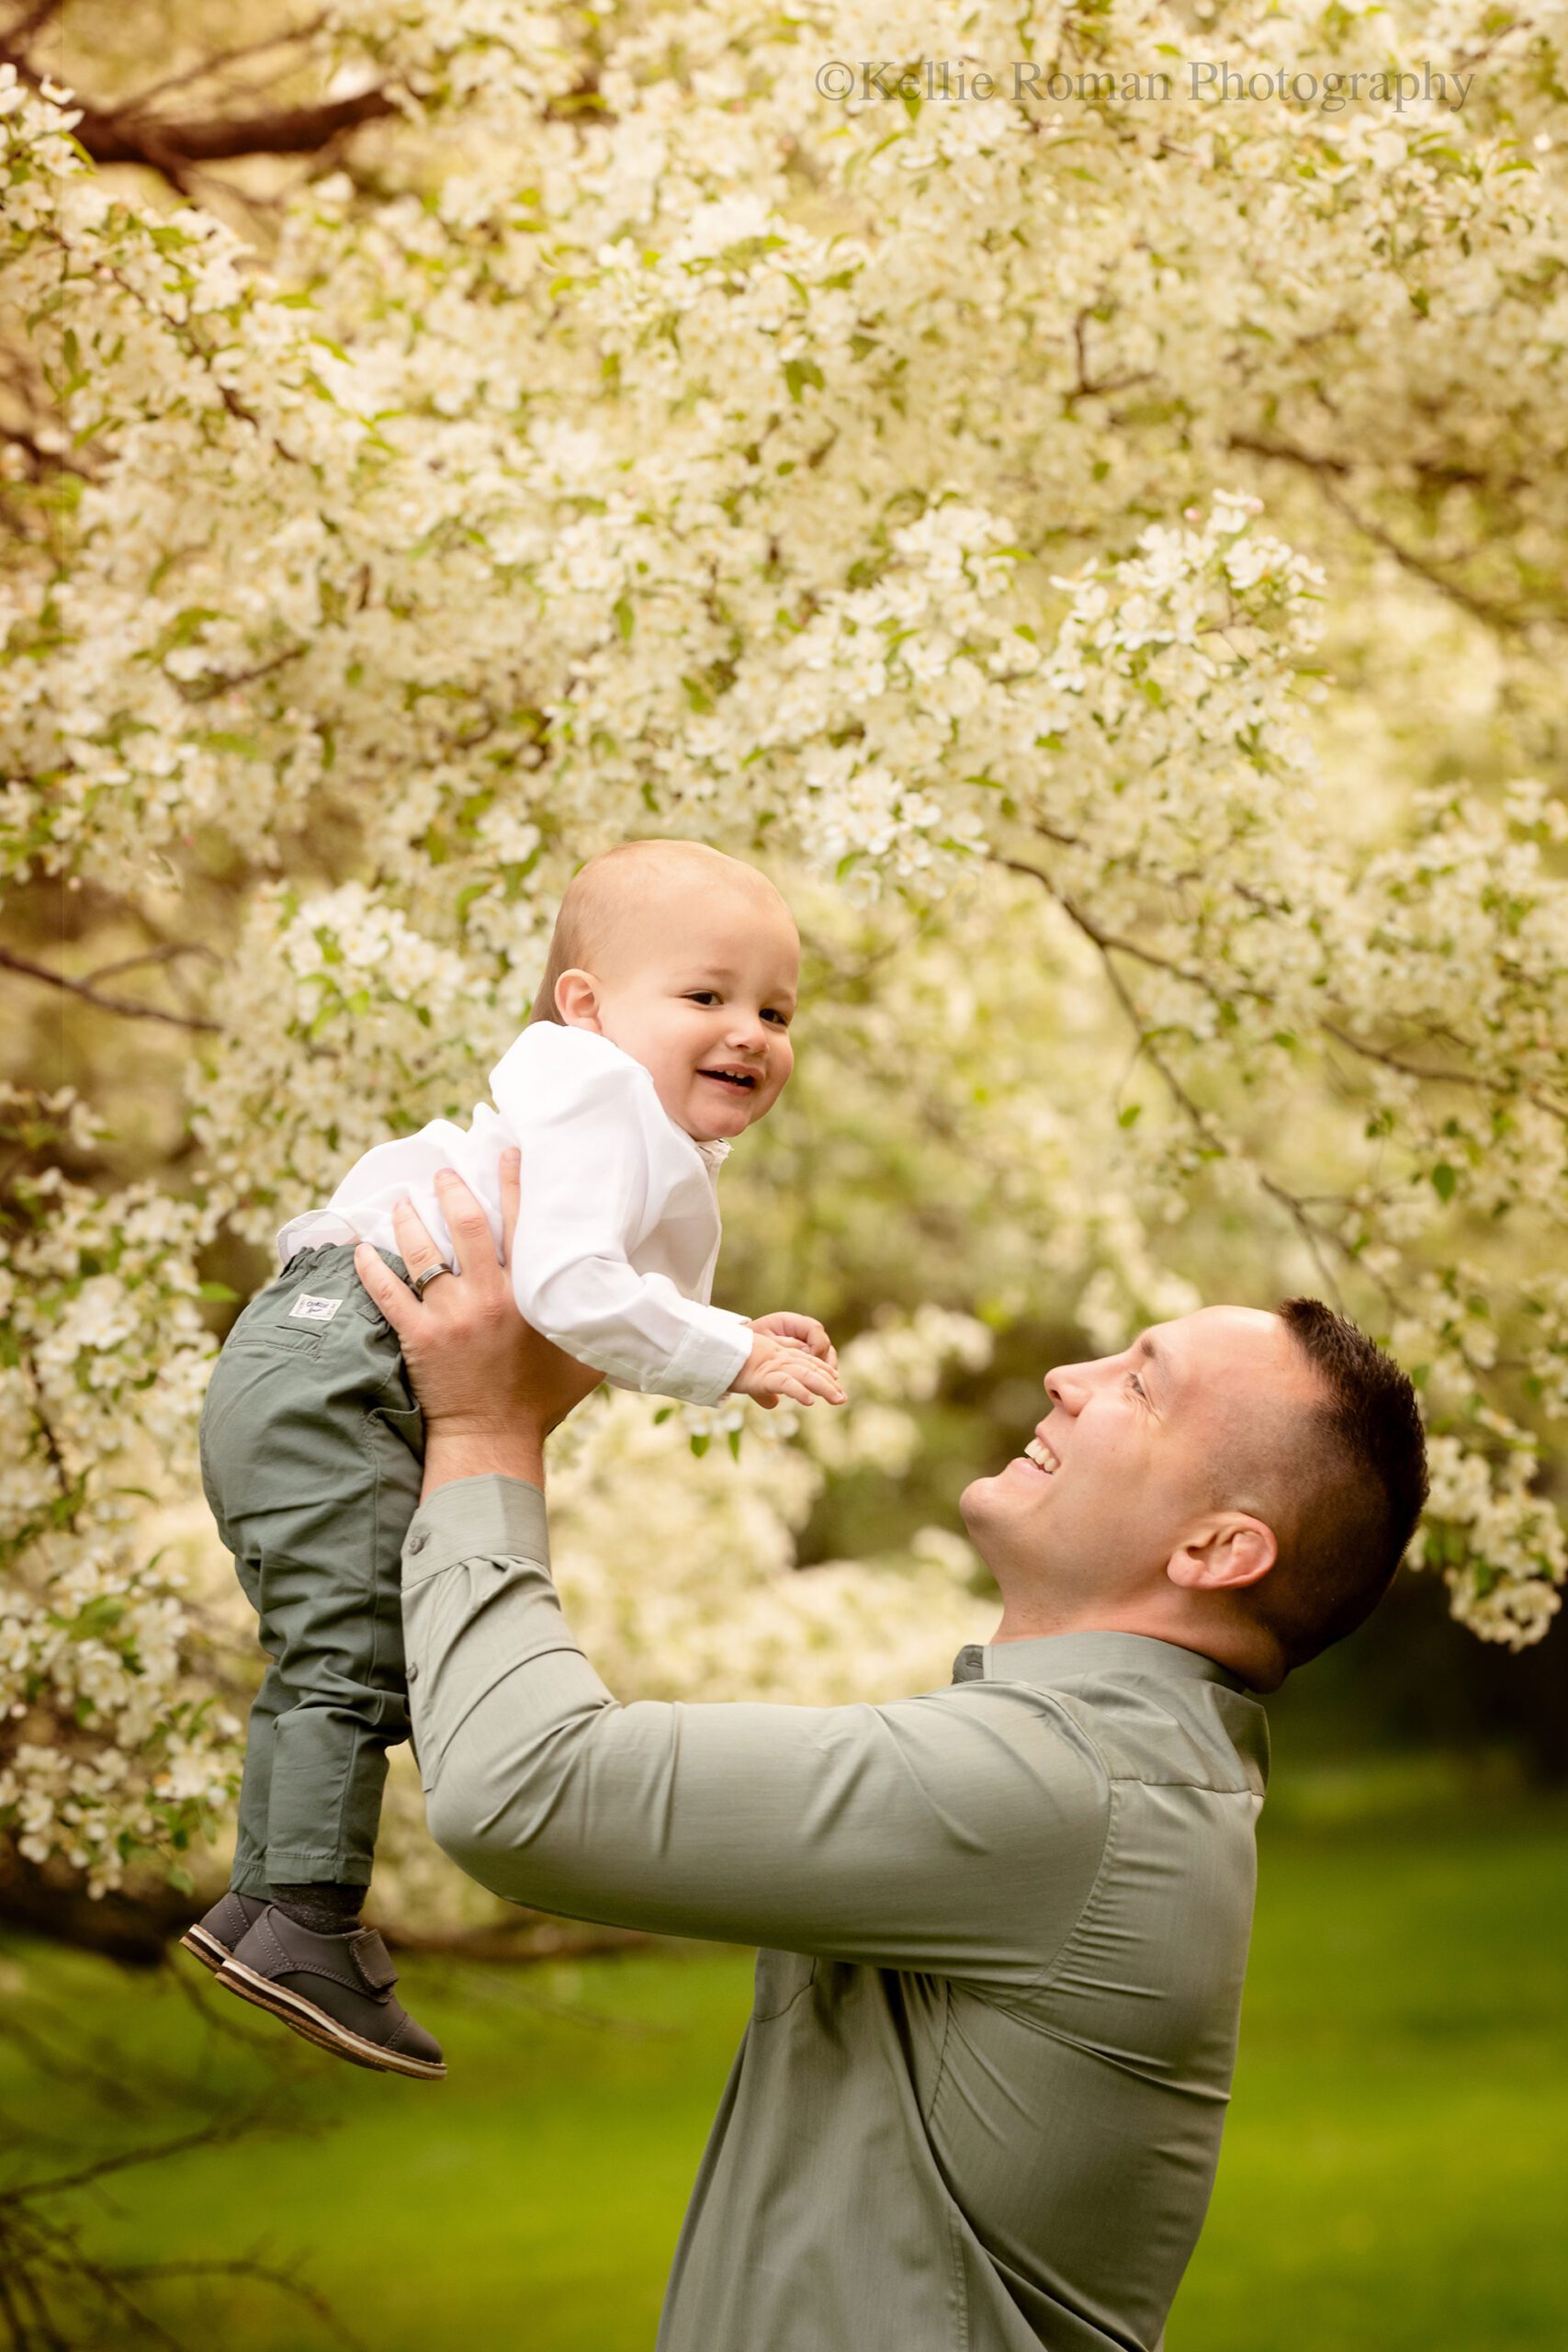 spring in milwaukee. a father is holding his one year old son up high in the air in a greendale park. there are trees with flowering trees behind them, and they are both smiling at each other. 